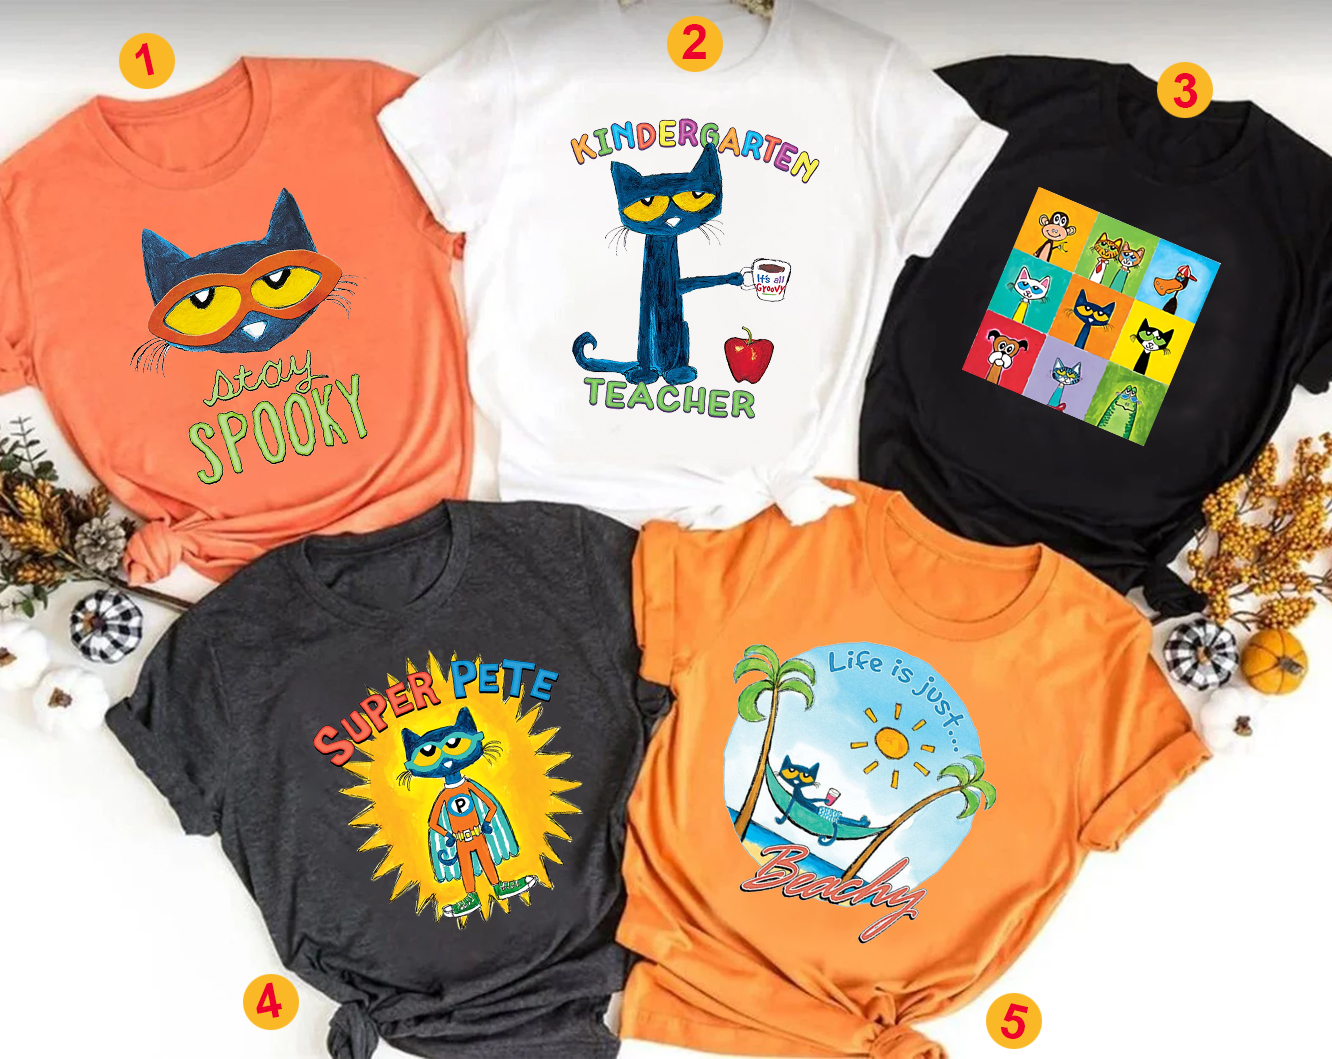 Personalized Pete The Cat shirt, Pete with Coffee shirt, Love, Life Is Groovy Shirt, Kindness shirt, Back to School Shirt, kids gift Graphic T-Shirt